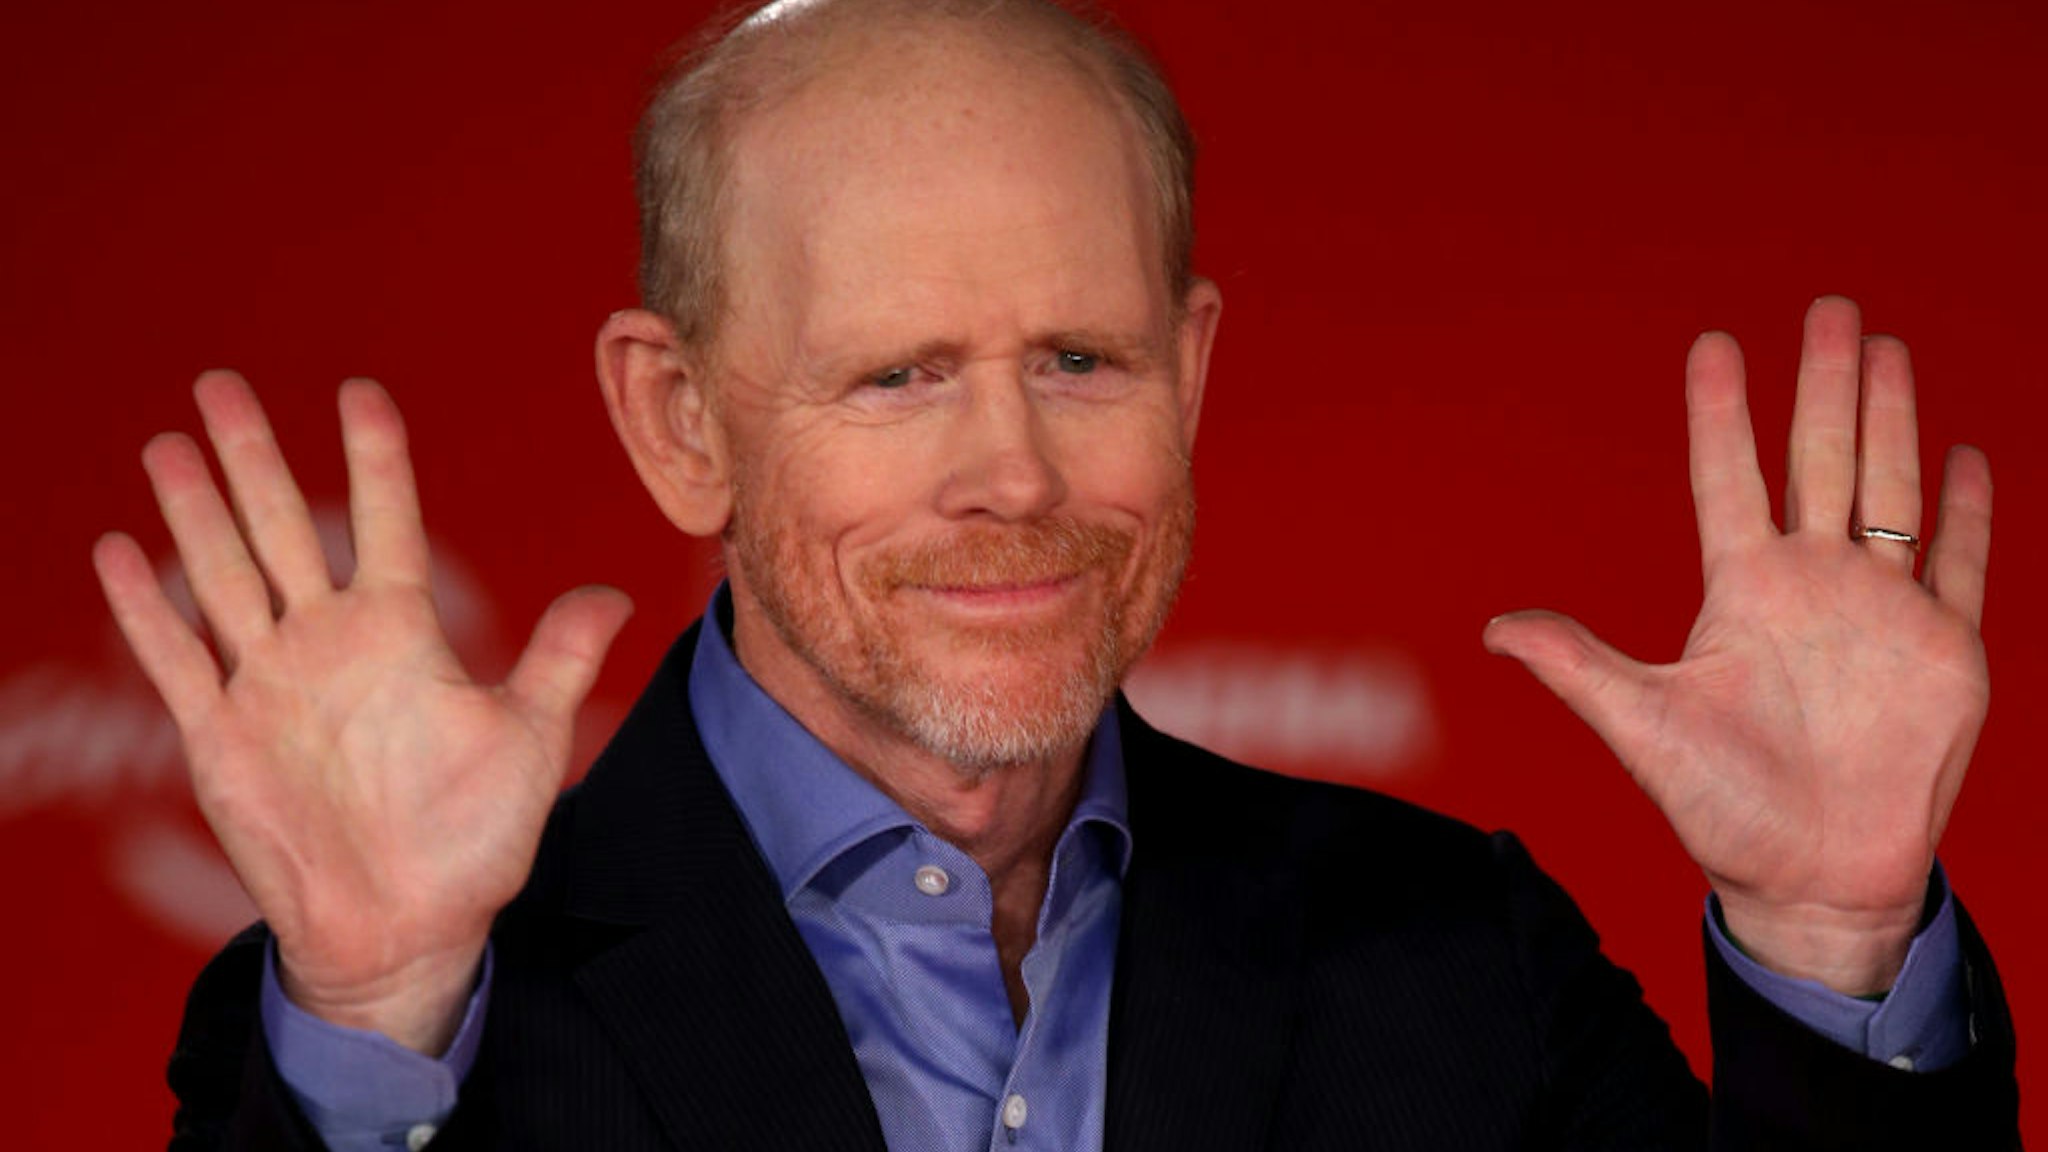 Ron Howard attends the "Pavarotti" red carpet during the 14th Rome Film Festival on October 18, 2019 in Rome, Italy.